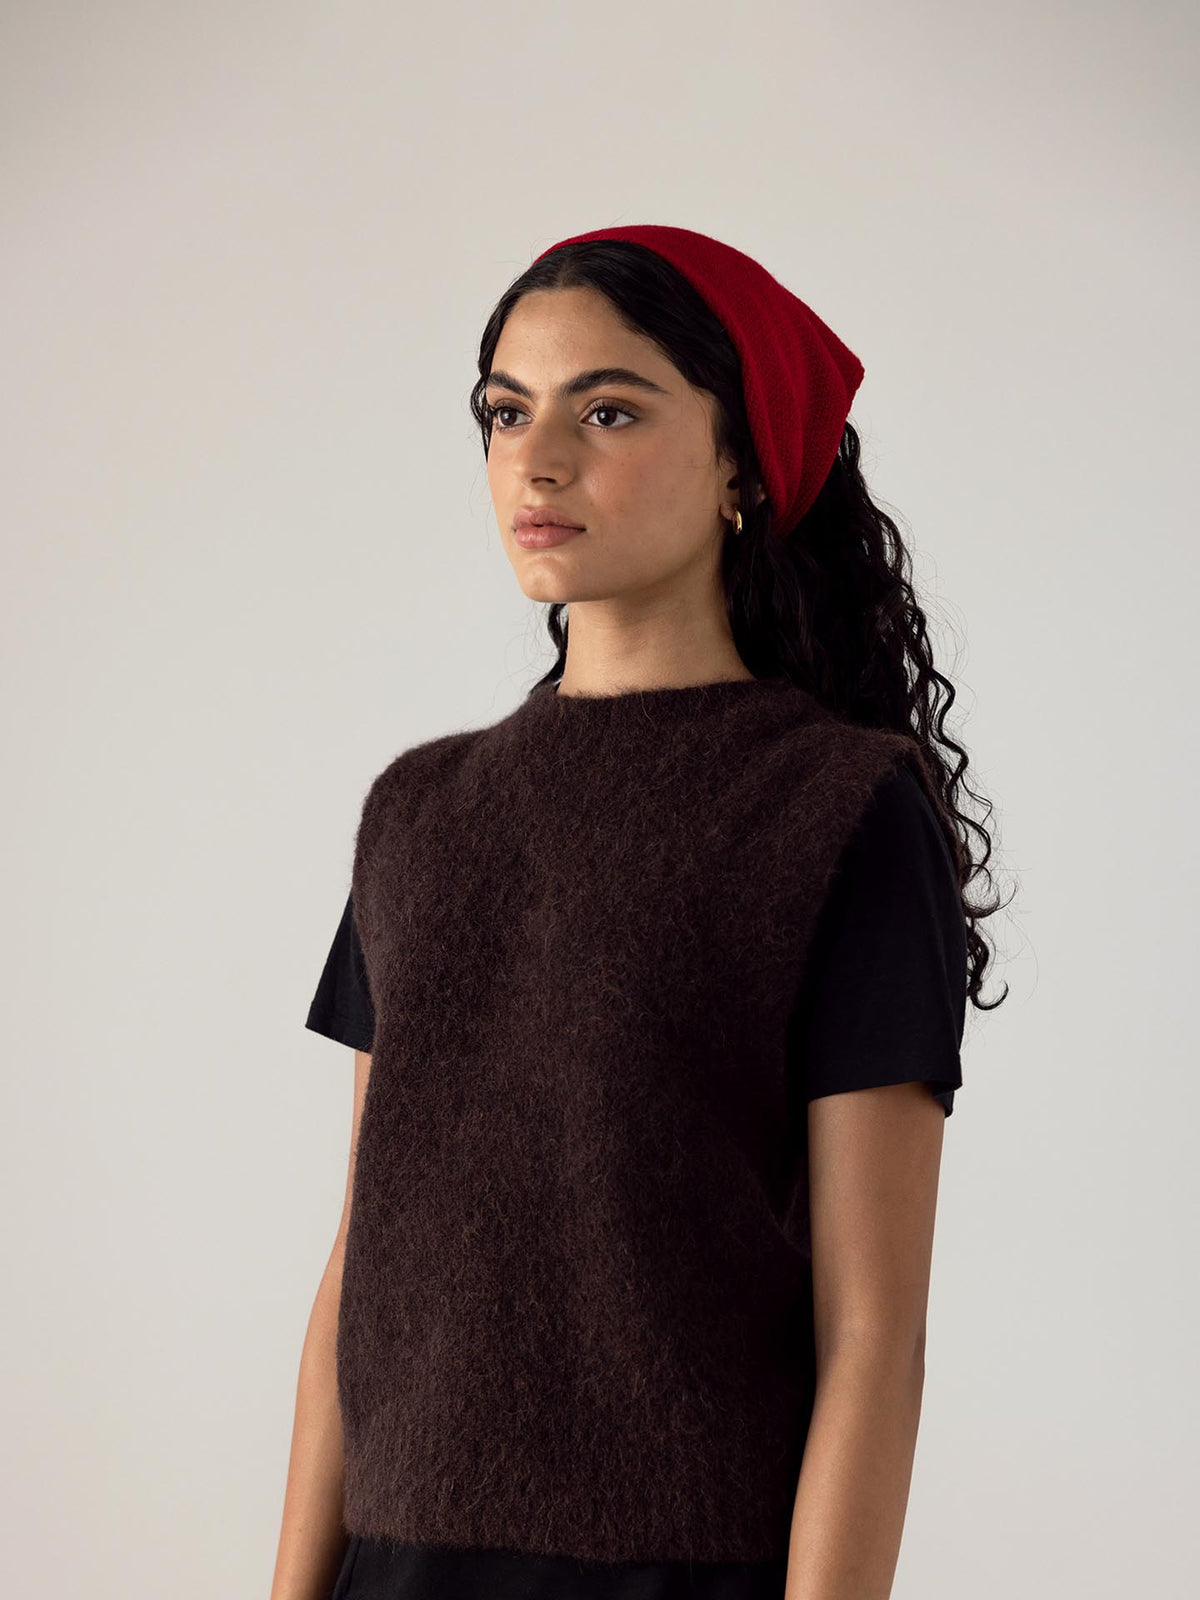 The model is wearing an ethically made brown Merino Wool sweater and a Francie red Daisy Scarf – Crimson.